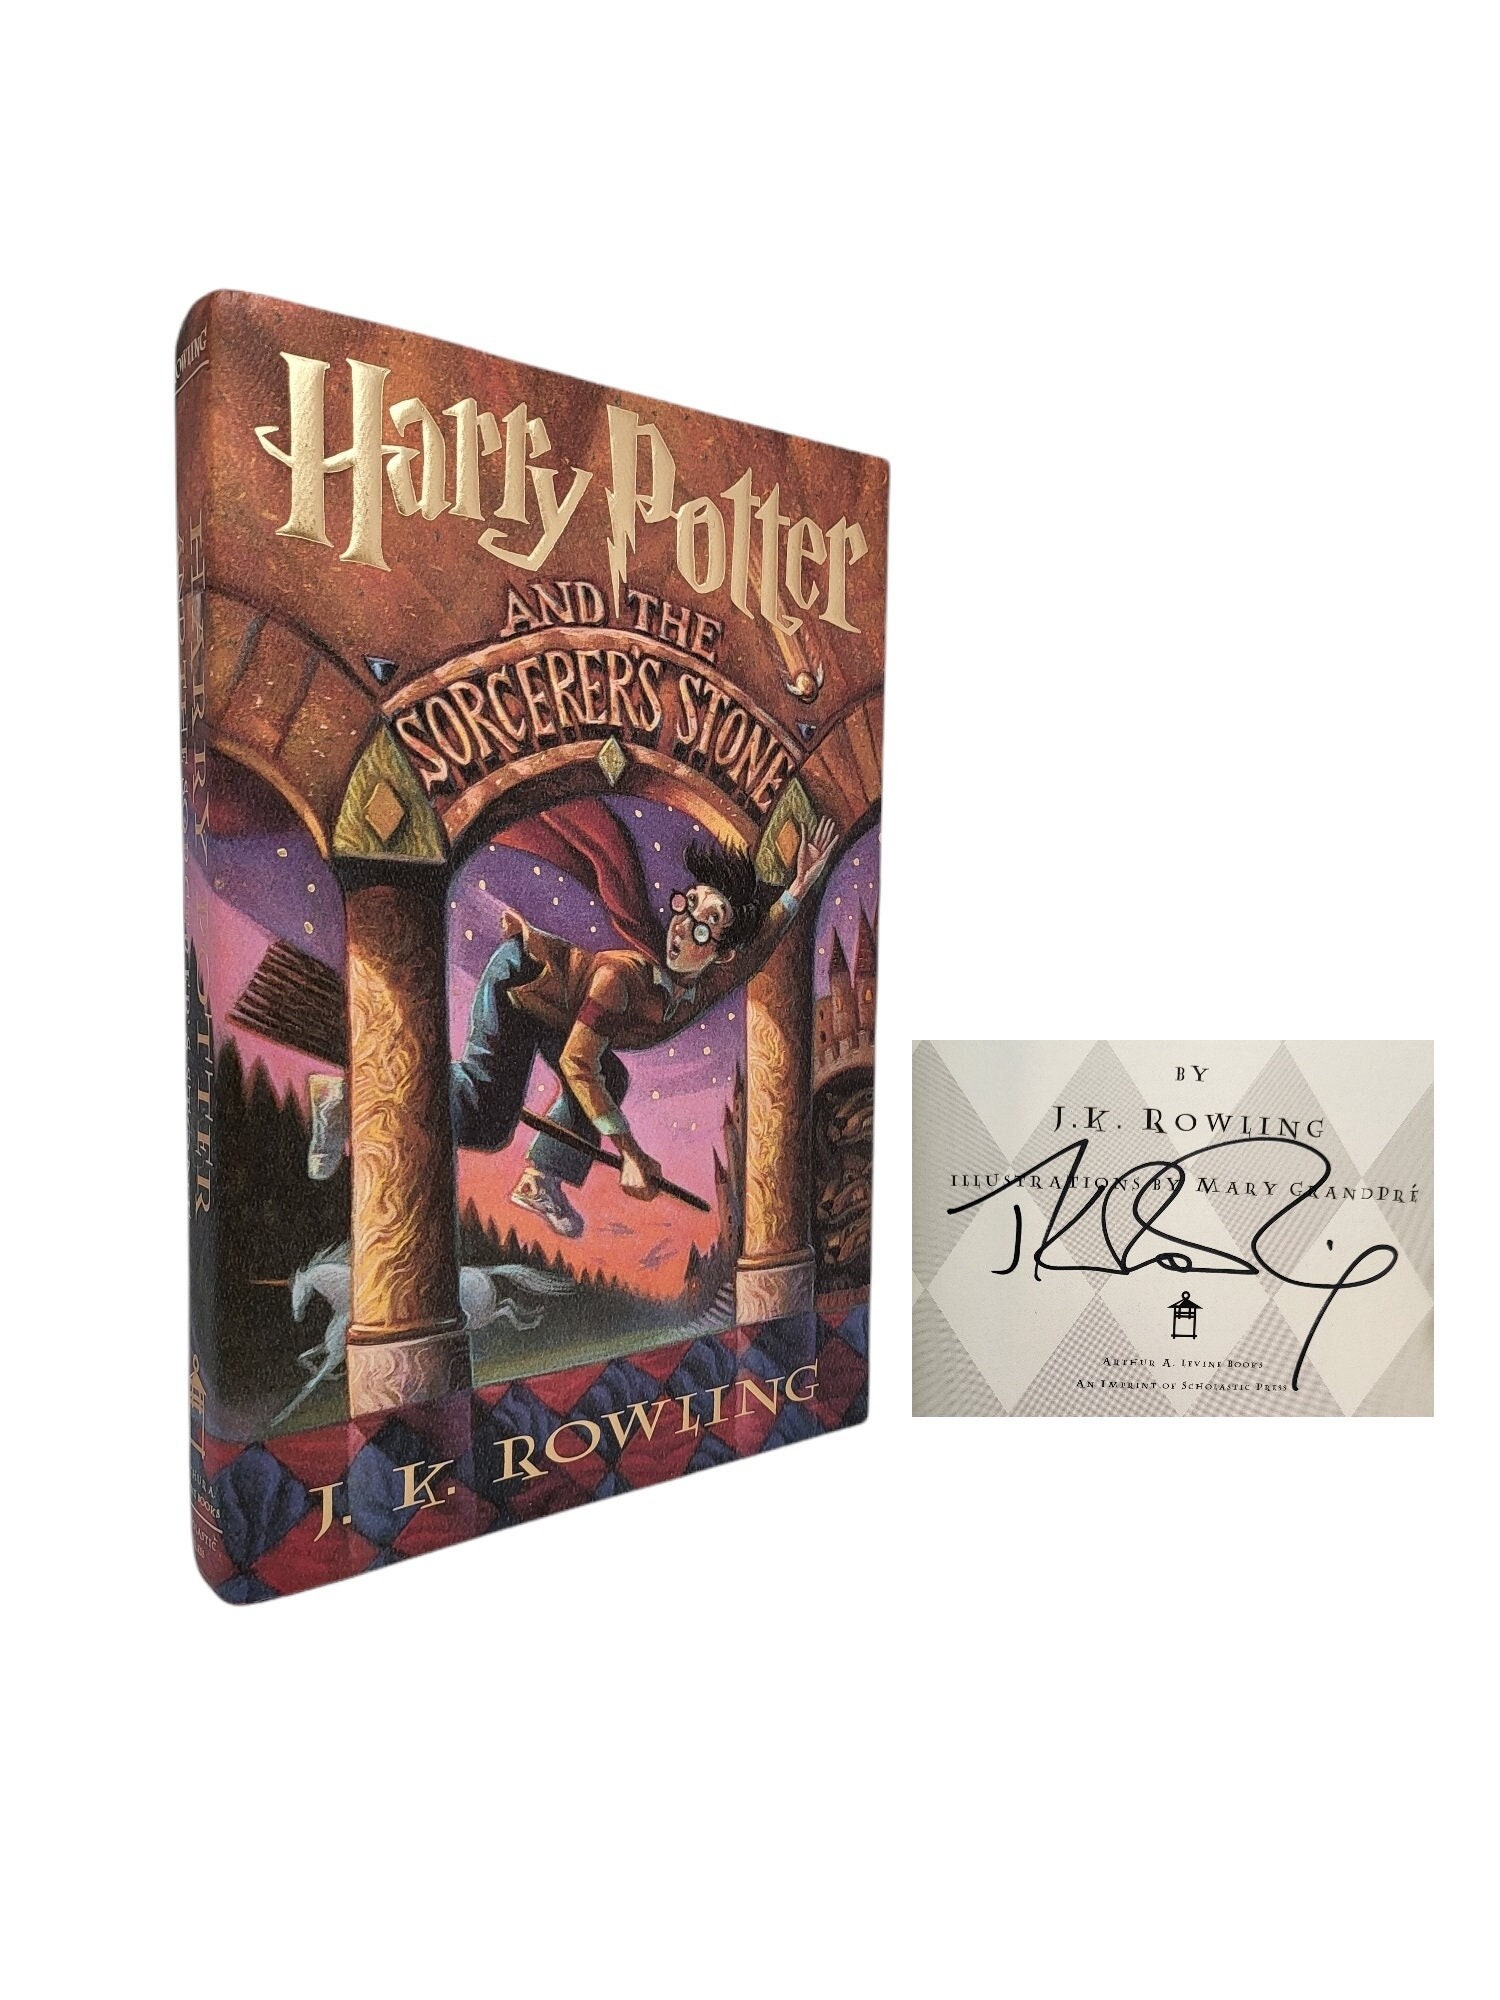 Harry Potter Origami Volume 2 (harry Potter) - By Scholastic